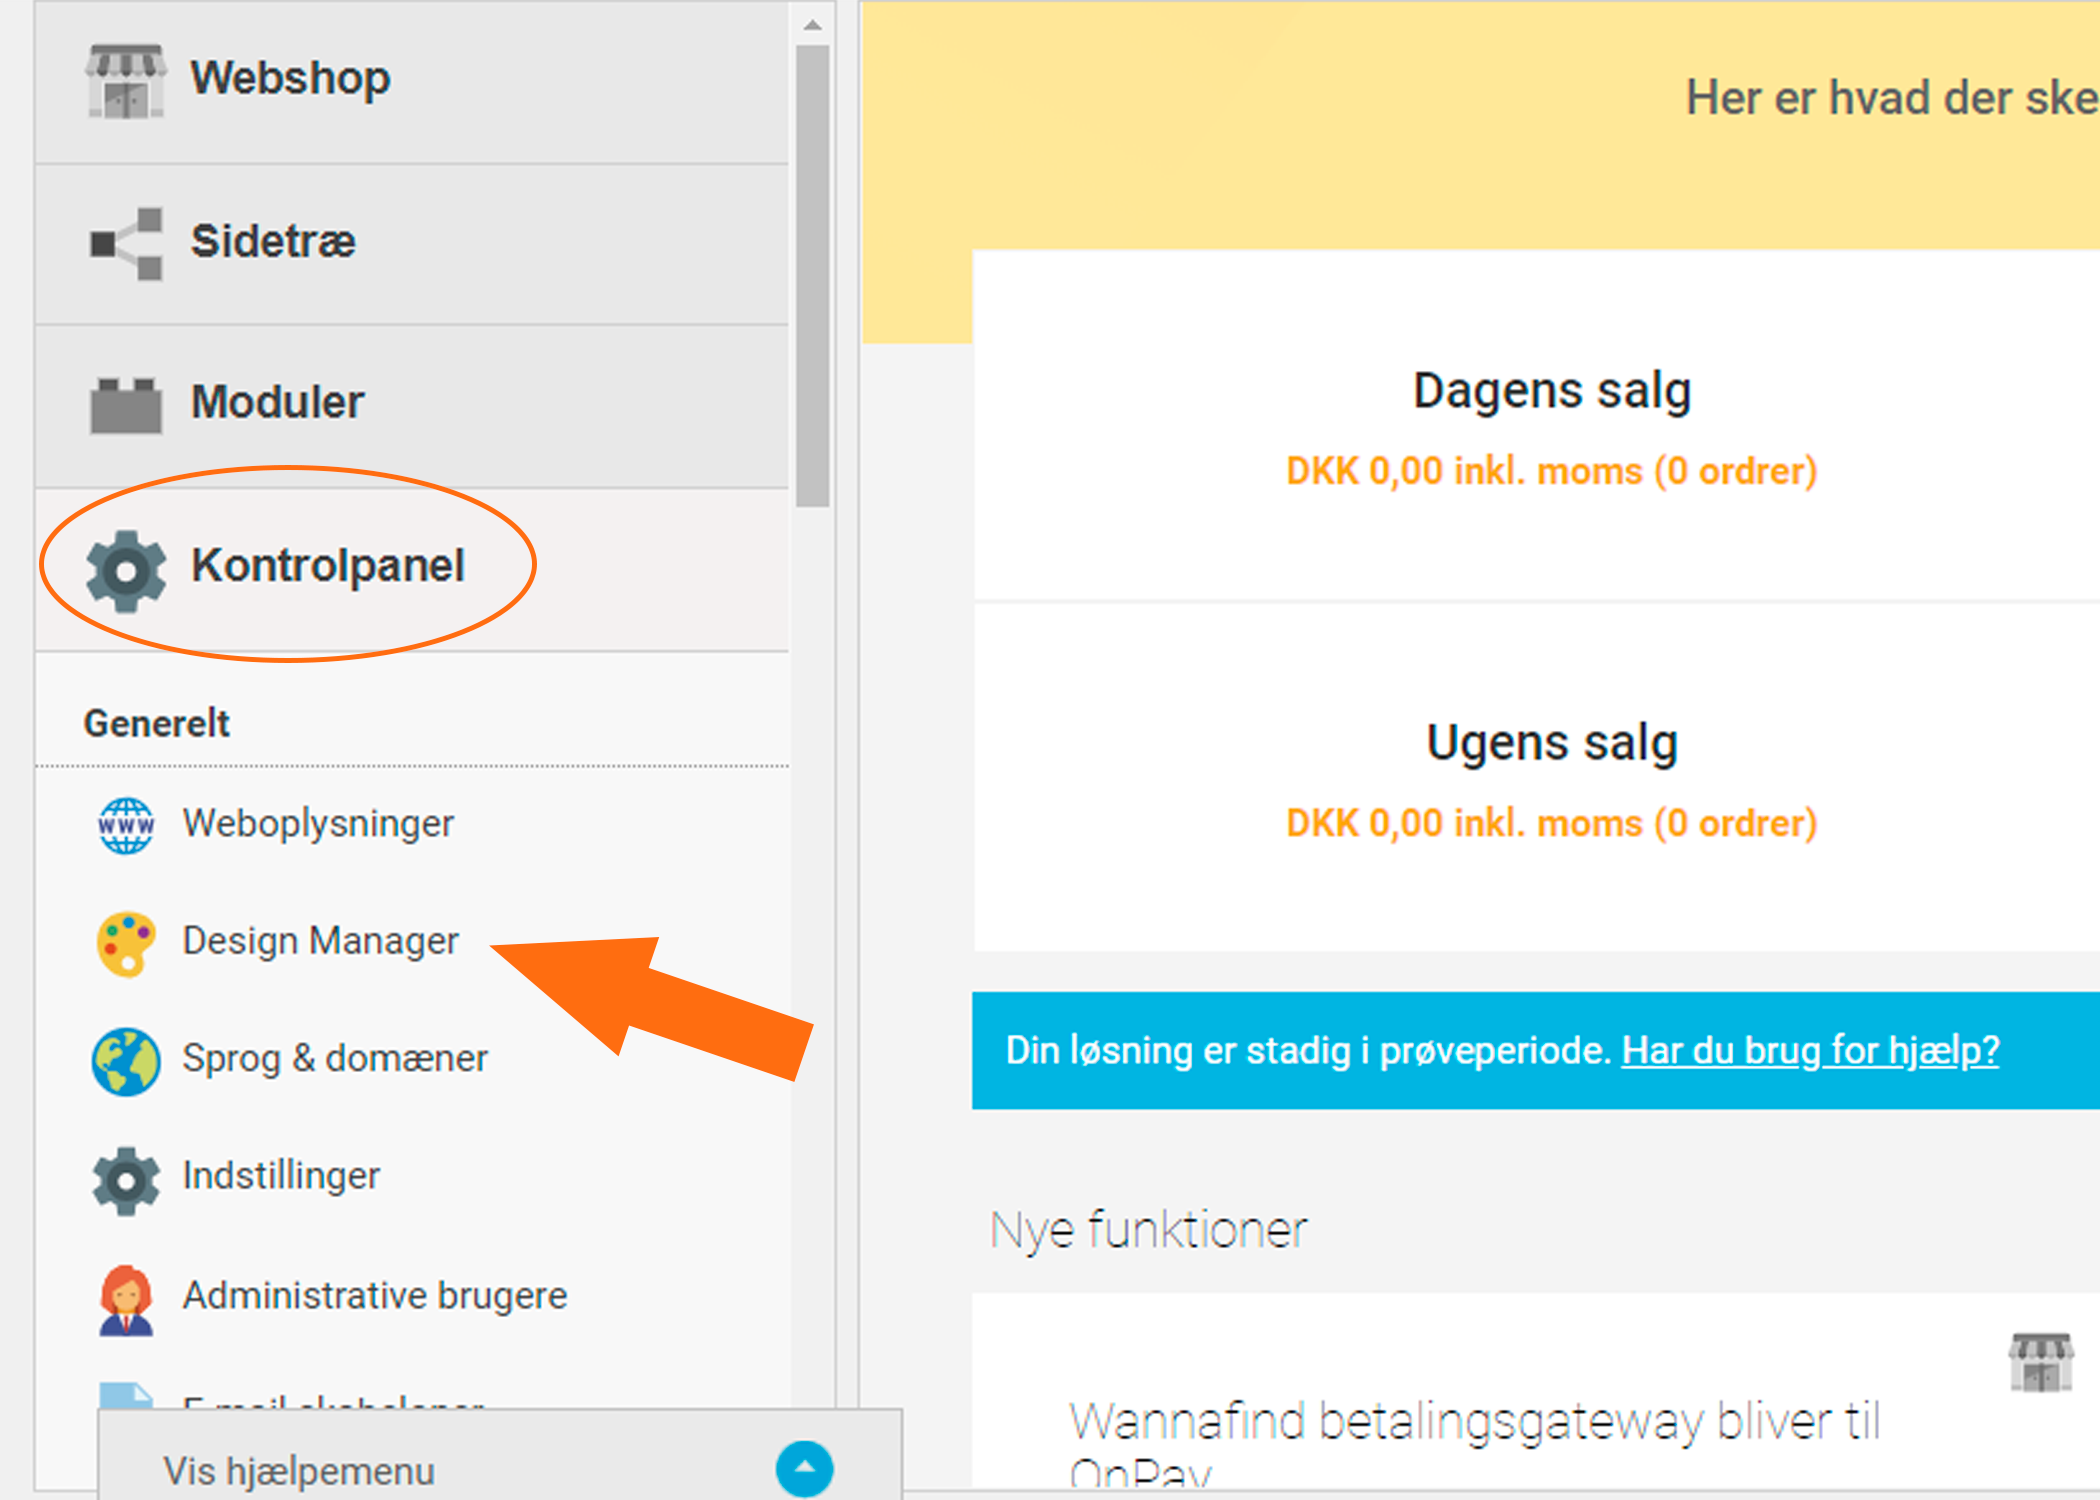 Designmanager.png